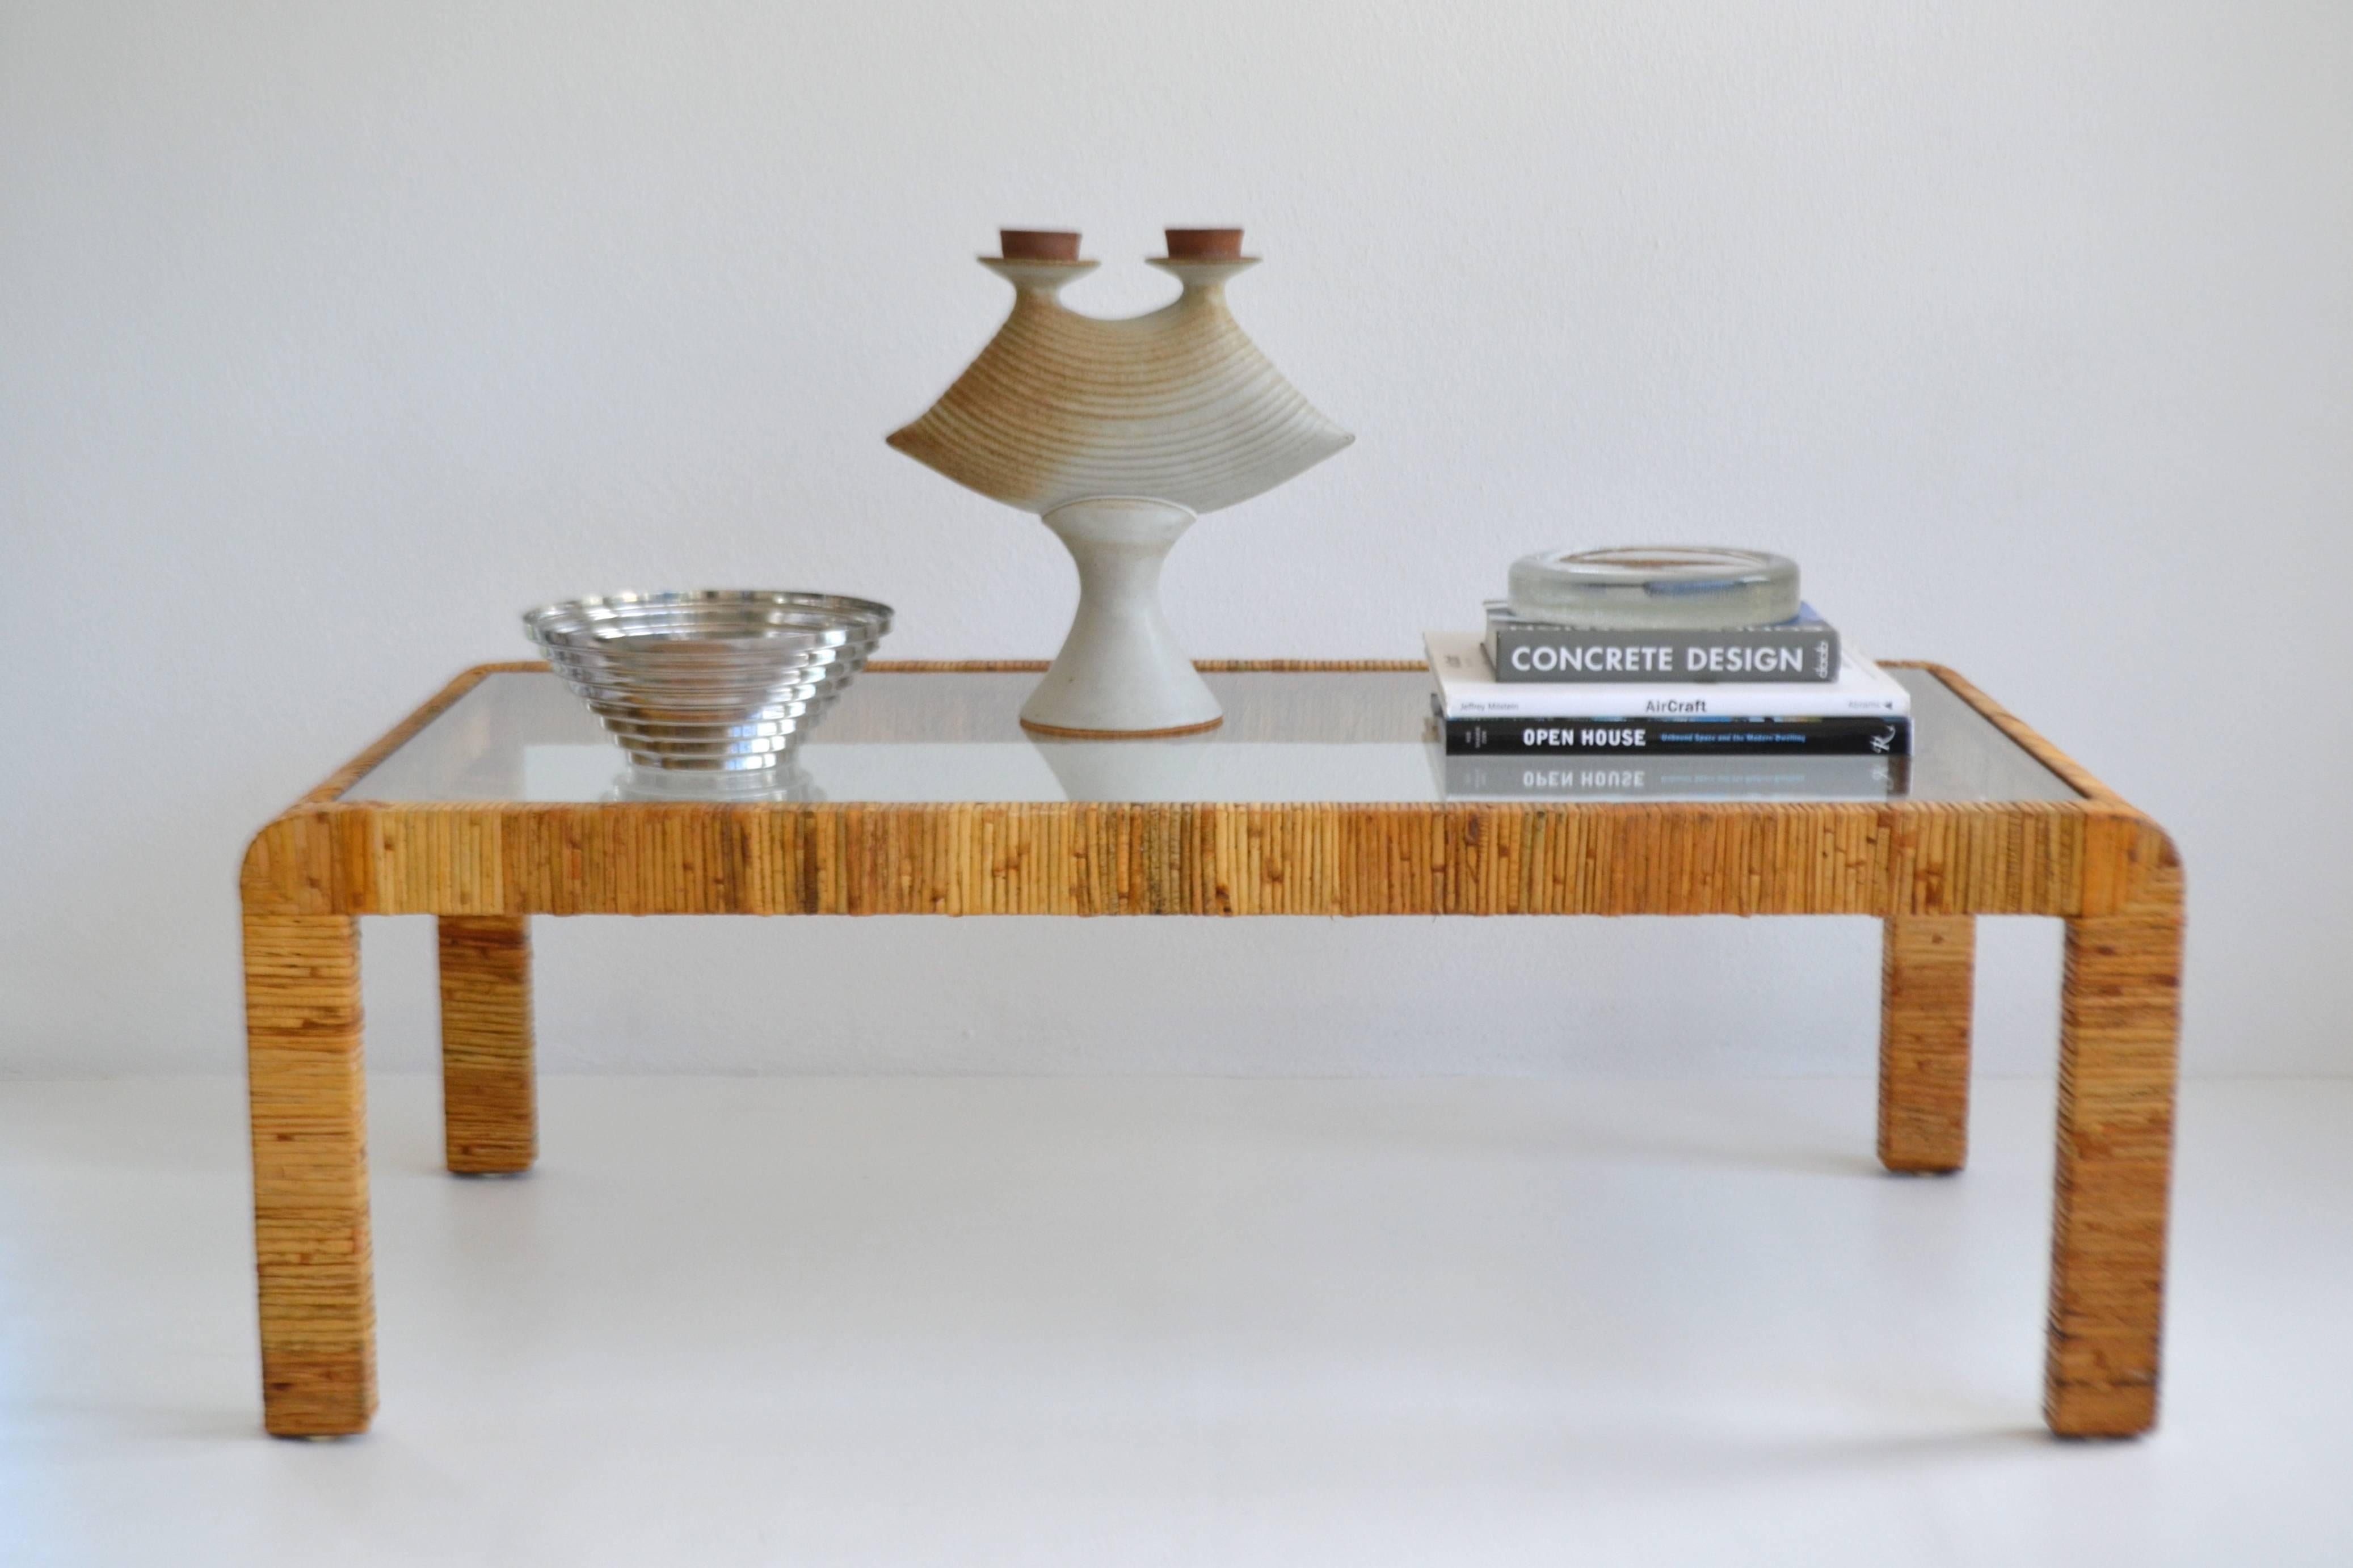 Striking Mid-Century rattan cocktail table, circa 1960s-1970s. This sleek rattan wrapped hardwood coffee table of waterfall edge design is accented with an inset glass top.